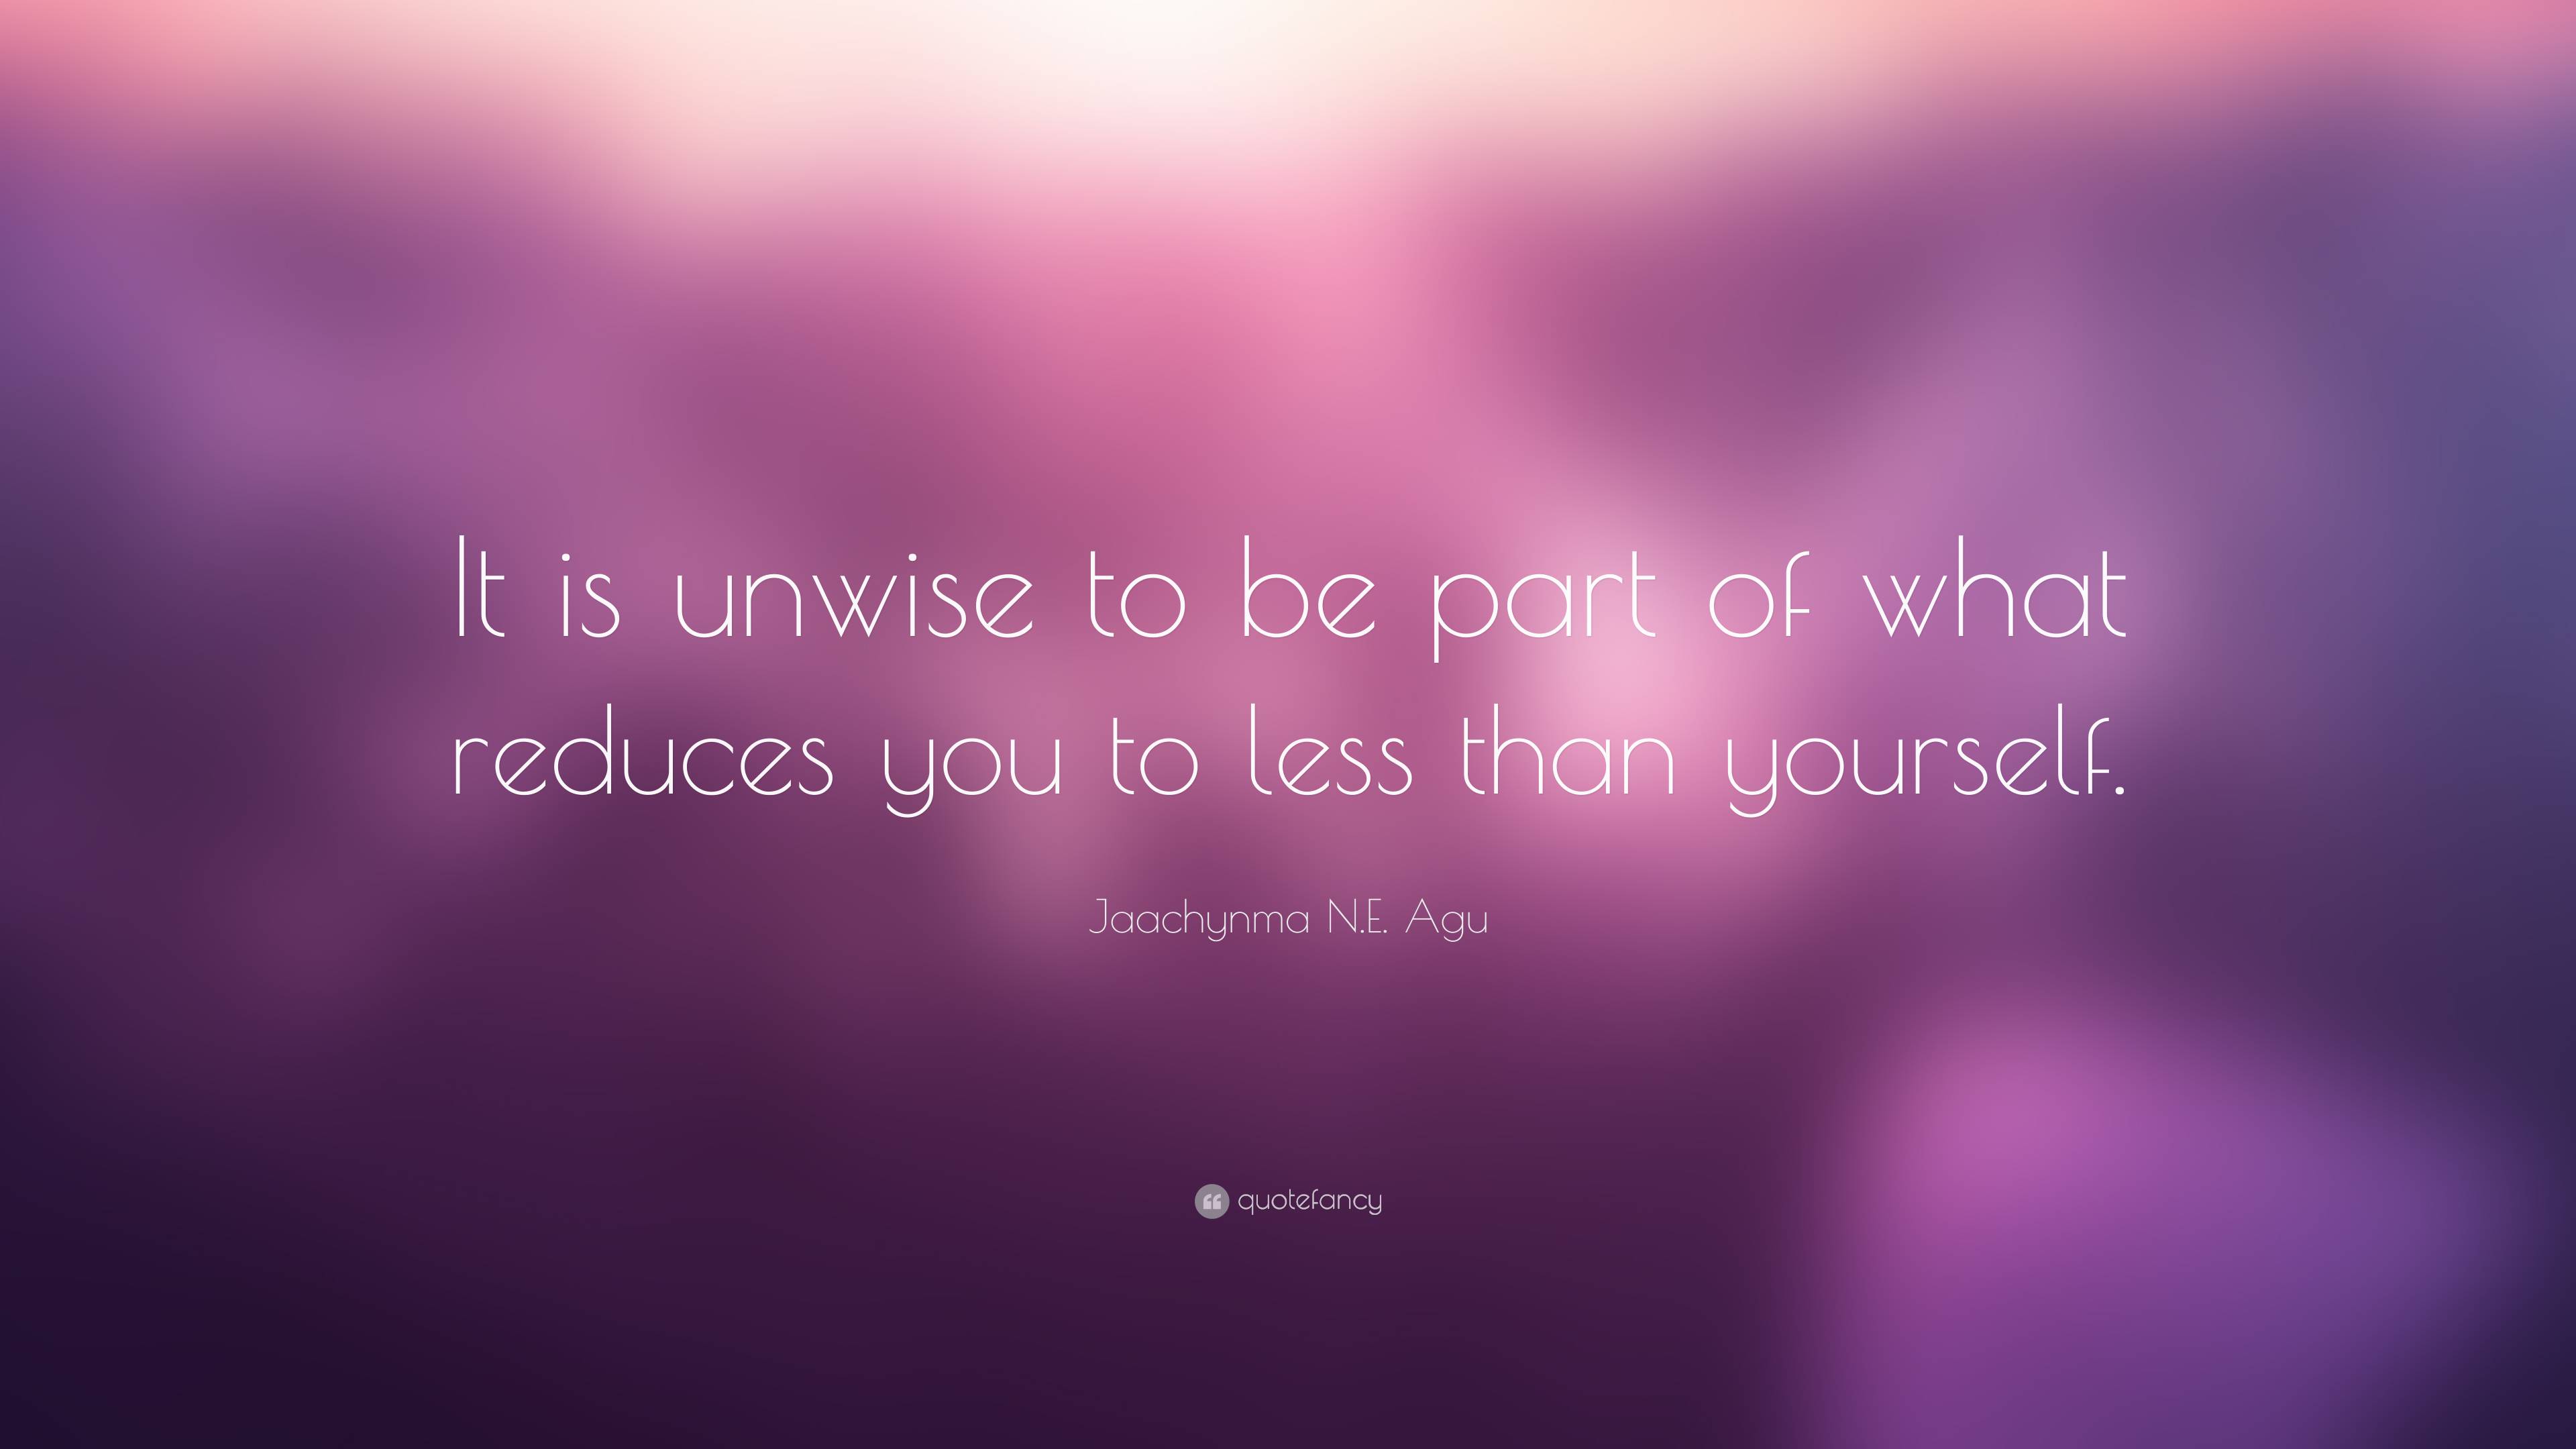 Jaachynma N.E. Agu Quote: “It is unwise to be part of what reduces you ...